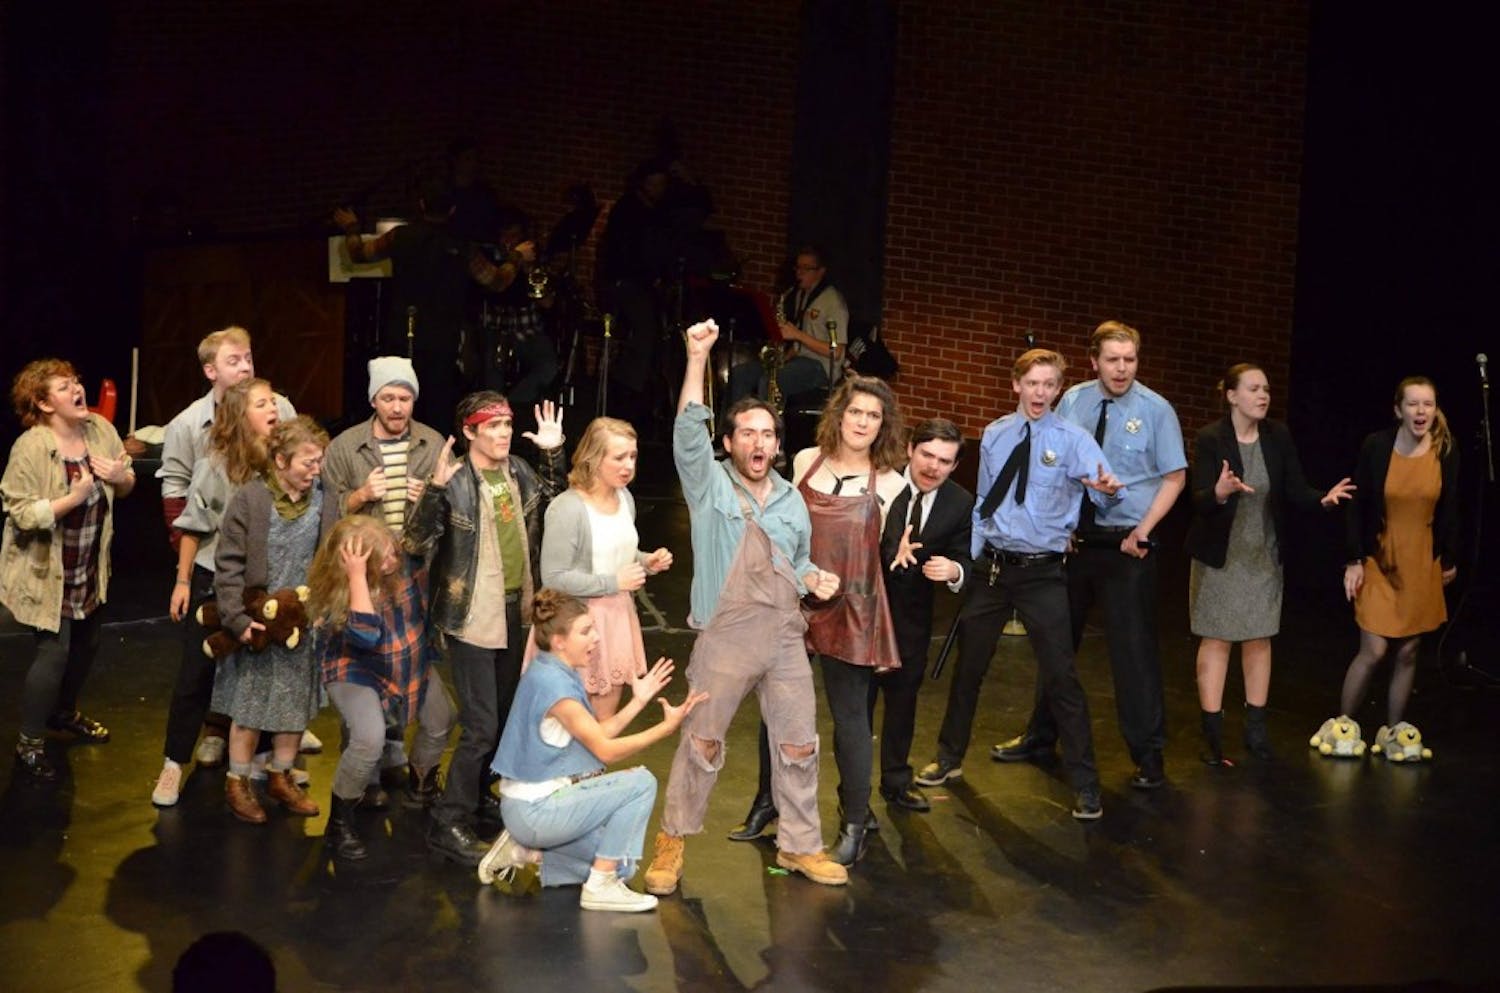 Every actor just seemed to fit perfectly with their character in this production of "Urinetown."